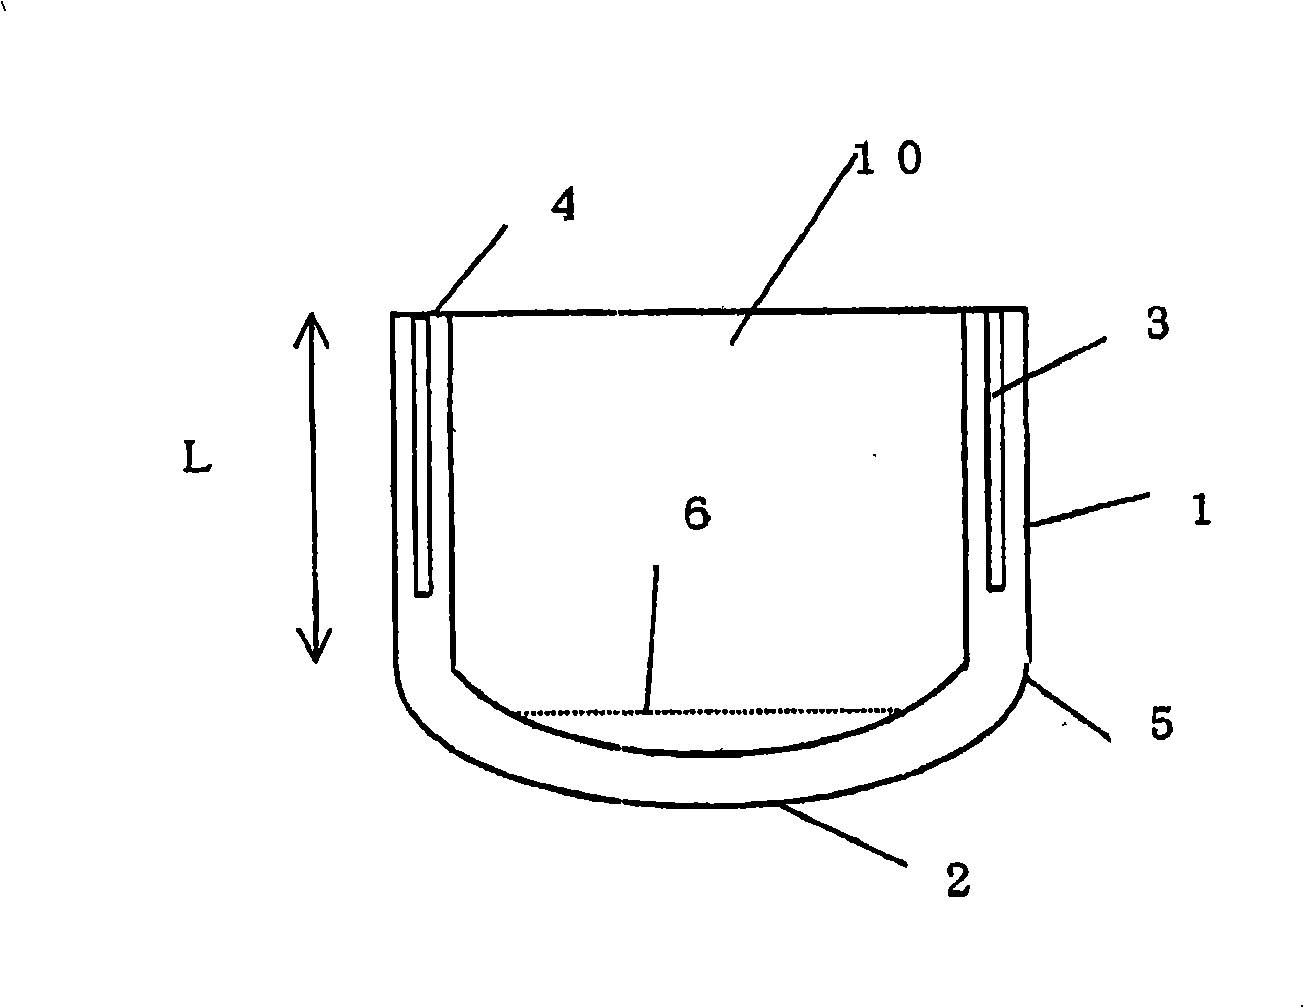 Quartz glass crucible, process for producing the same, and use